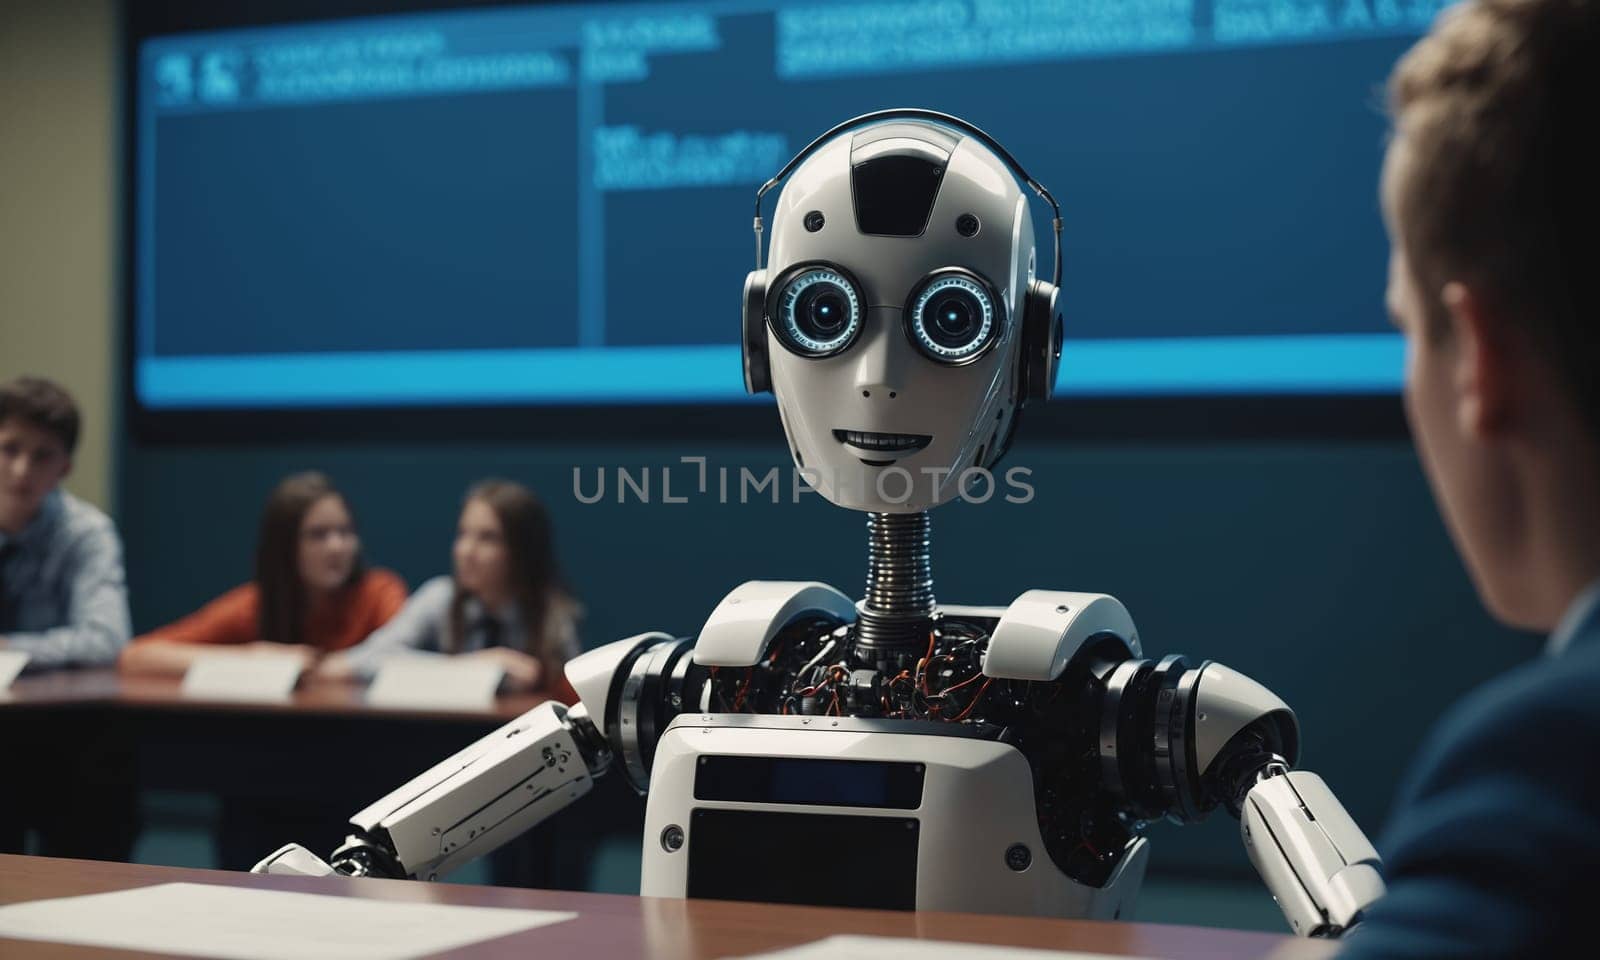 A robot sits at a desk in a classroom with students by Andre1ns